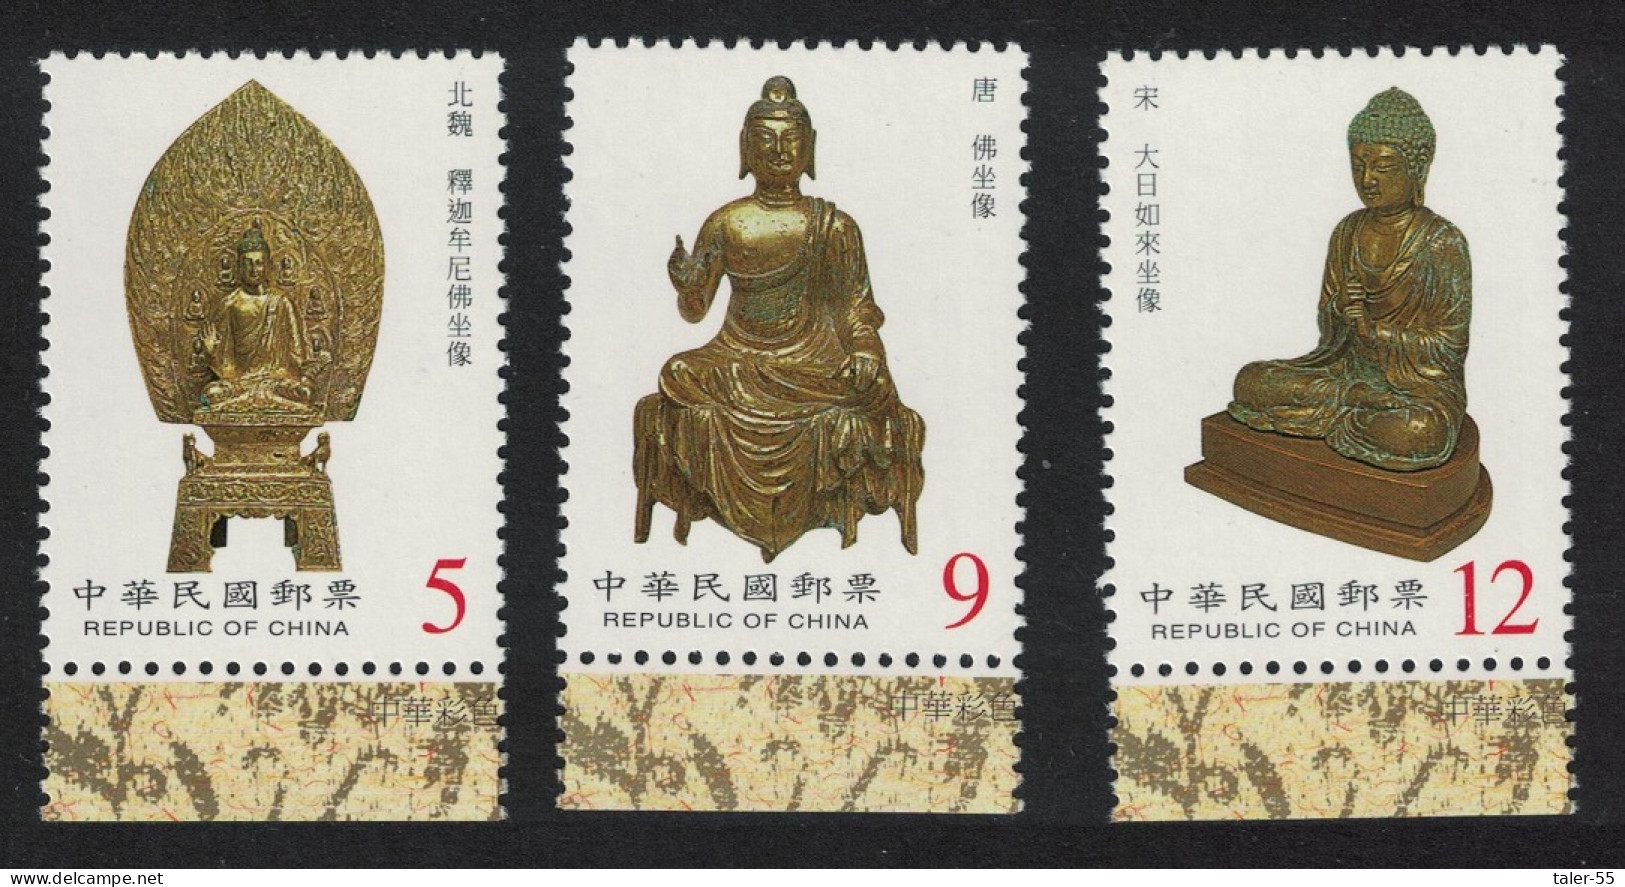 Taiwan Ancient Statues Of Buddha 3v Margins 2001 MNH SG#2711-2713 - Unused Stamps